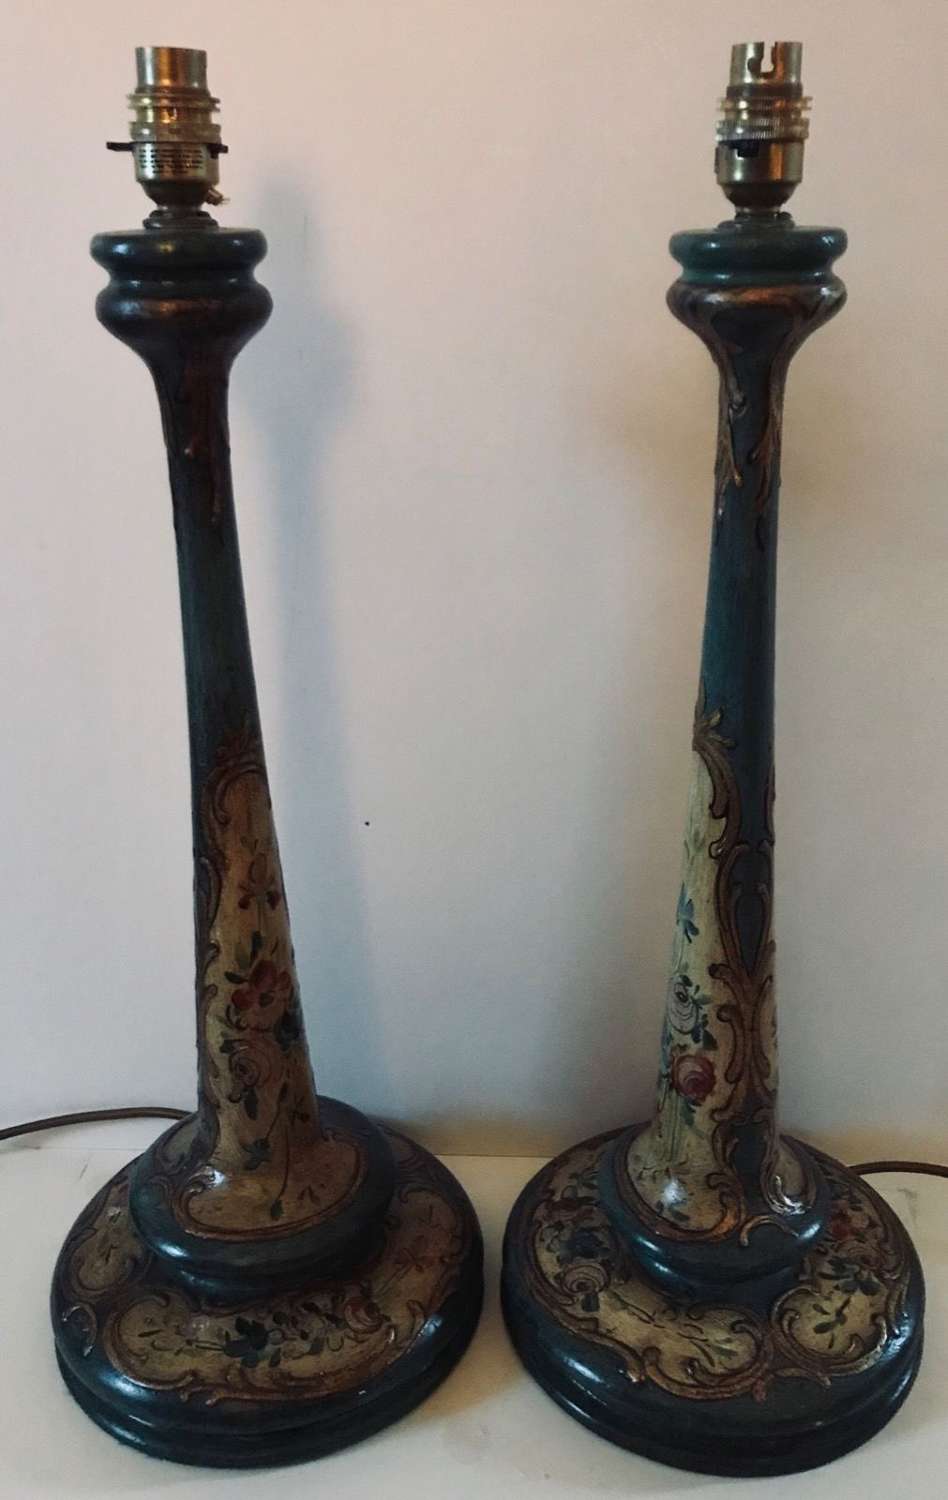 Highly Decorative Hand Painted 19th Century Lamps